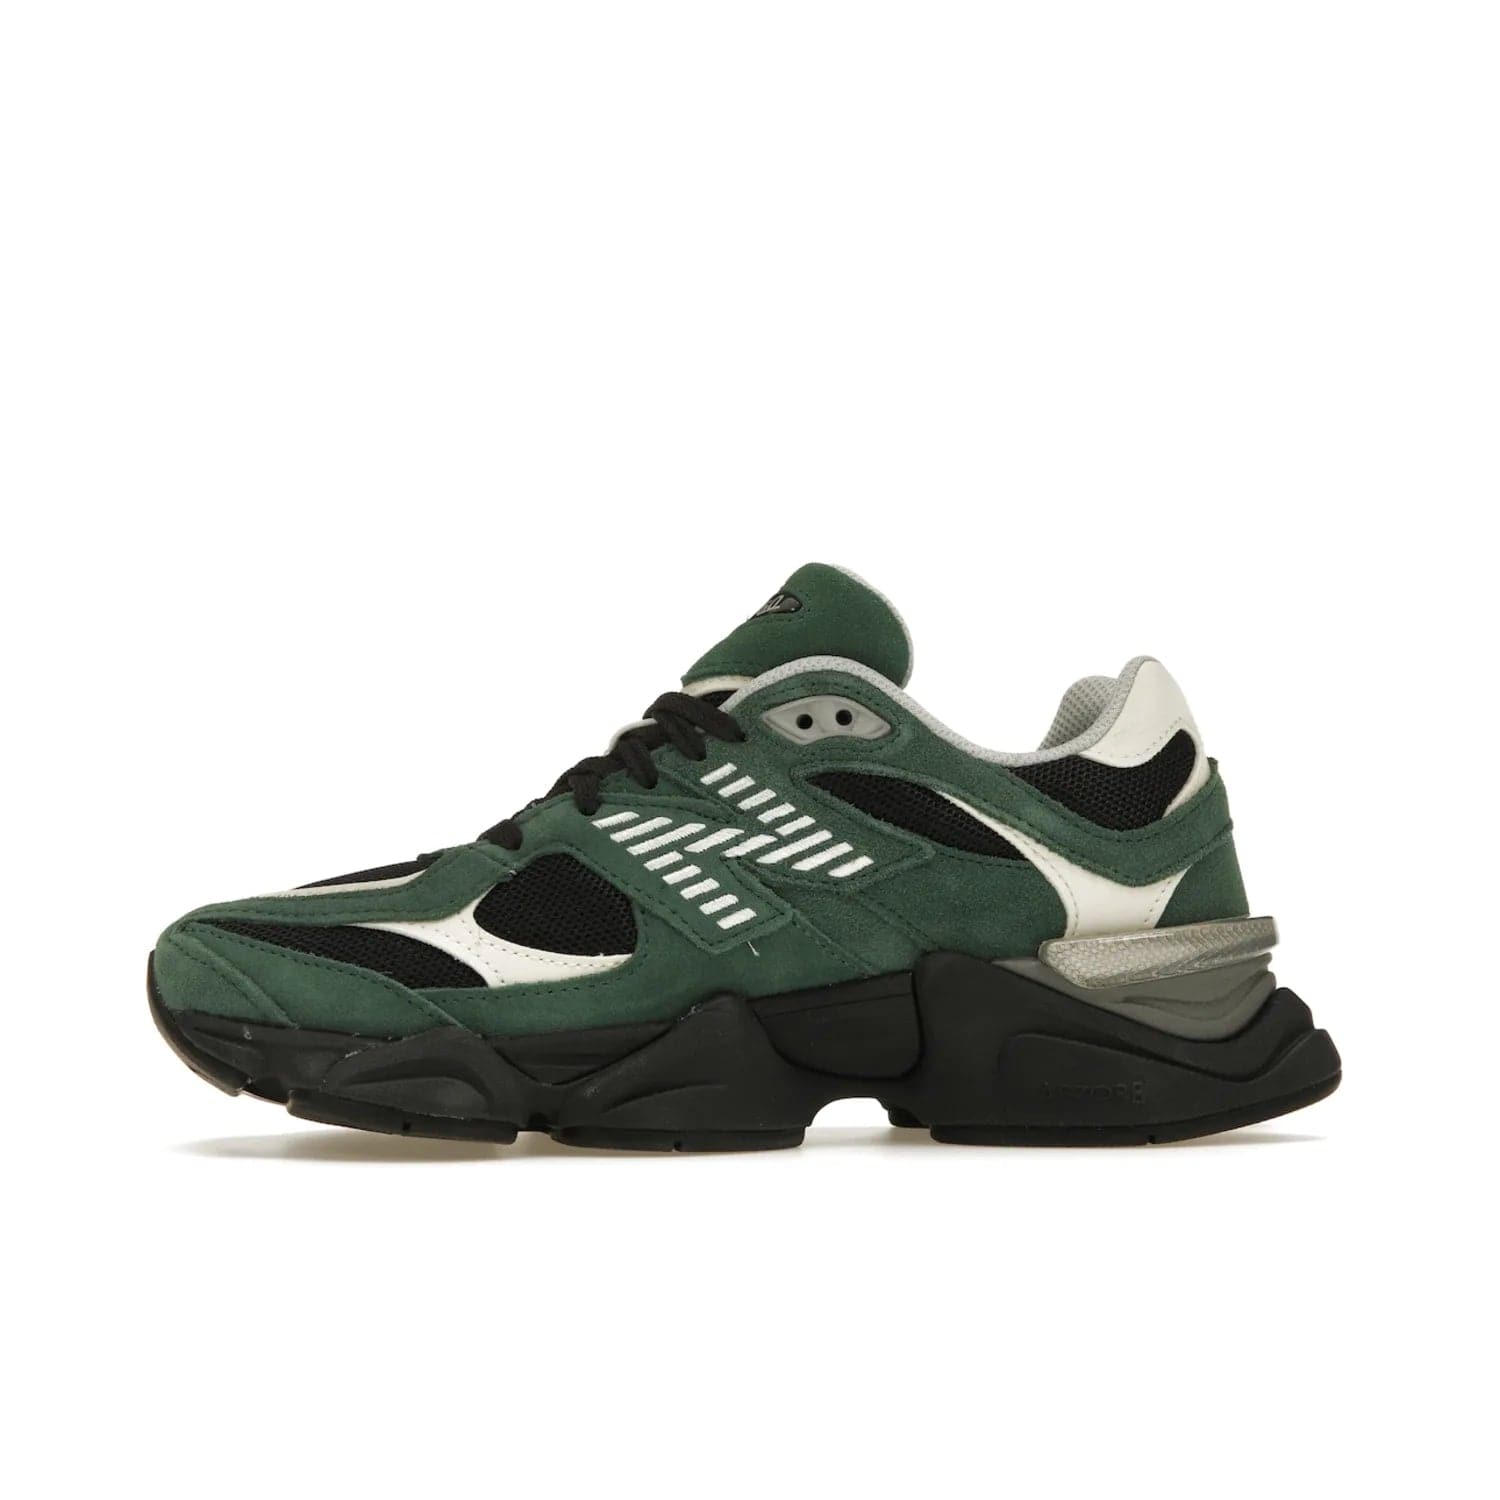 New Balance 9060 Team Forest Green - Image 18 - Only at www.BallersClubKickz.com - Introducing the New Balance 9060 Team Forest Green! Durable statement sneaker with a vibrant forest green upper and contrast detailing. Release date 2023-04-04 - don't miss out!